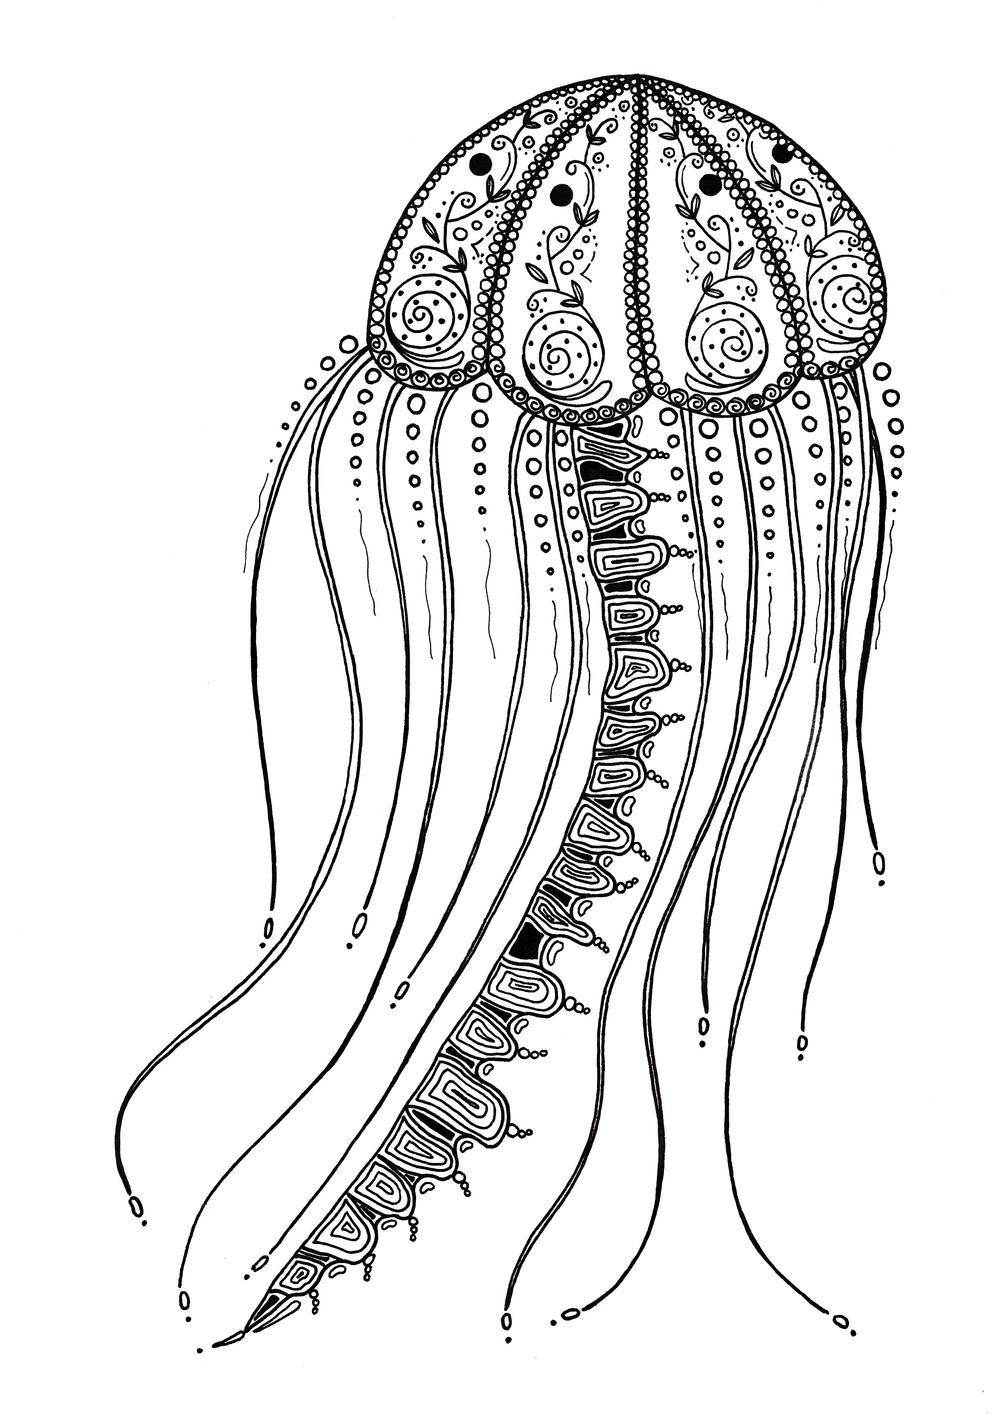 Download Delicate Jellyfish Adult Coloring Page | FaveCrafts.com